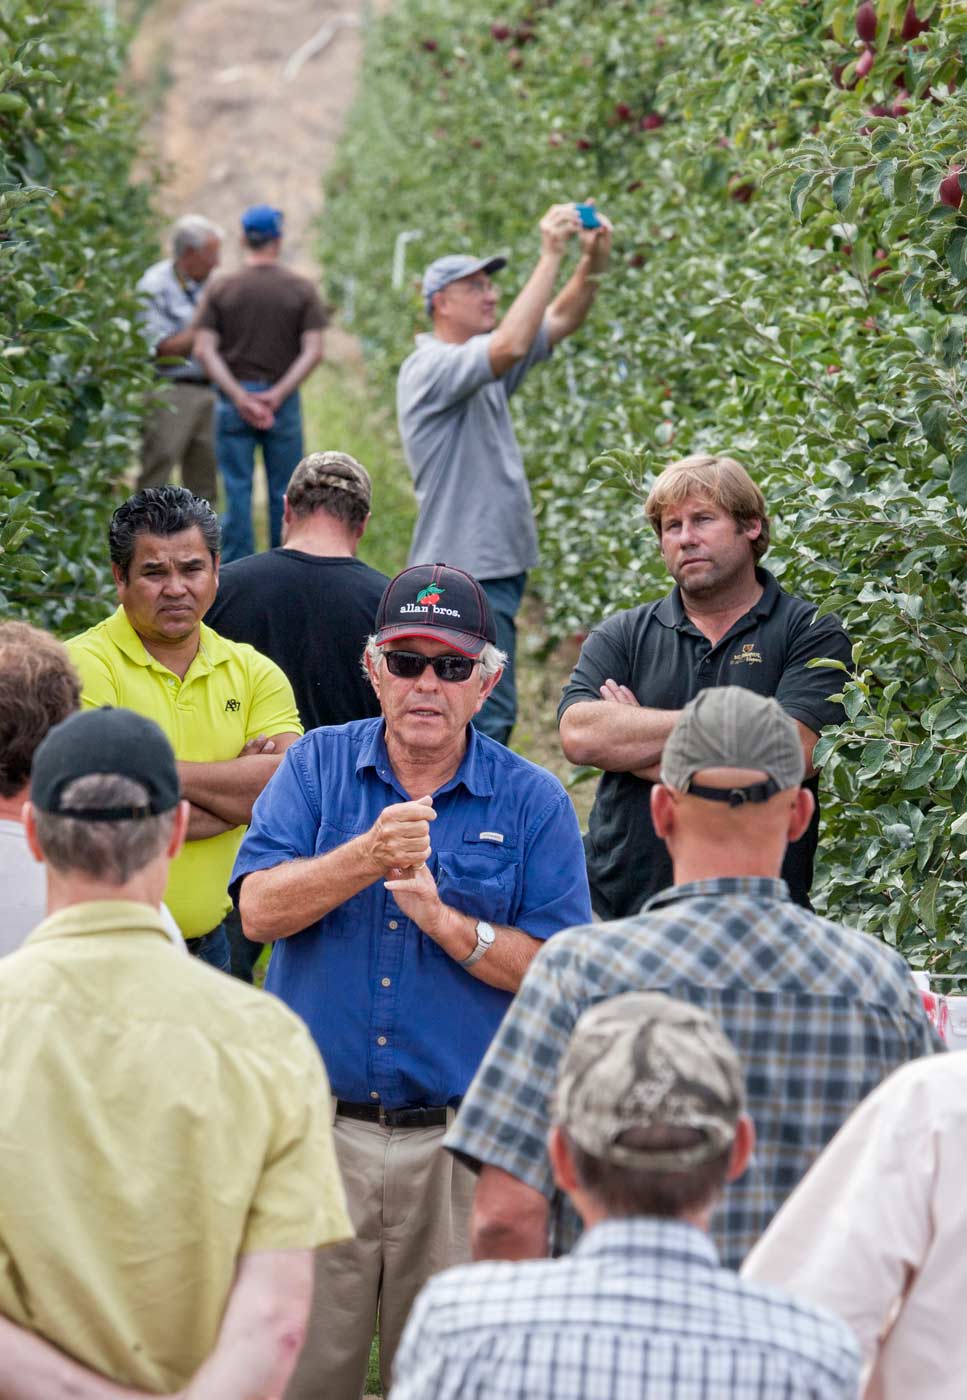 Dave Allan talks about WA 38 during a preharvest preview of the variety in Prosser, Washington, in 2014. Allan Bros. helped pioneer commercial test plantings of WSU’s newest variety, now known by the brand name Cosmic Crisp.<b>(TJ Mullinax/Good Fruit Grower)</b>